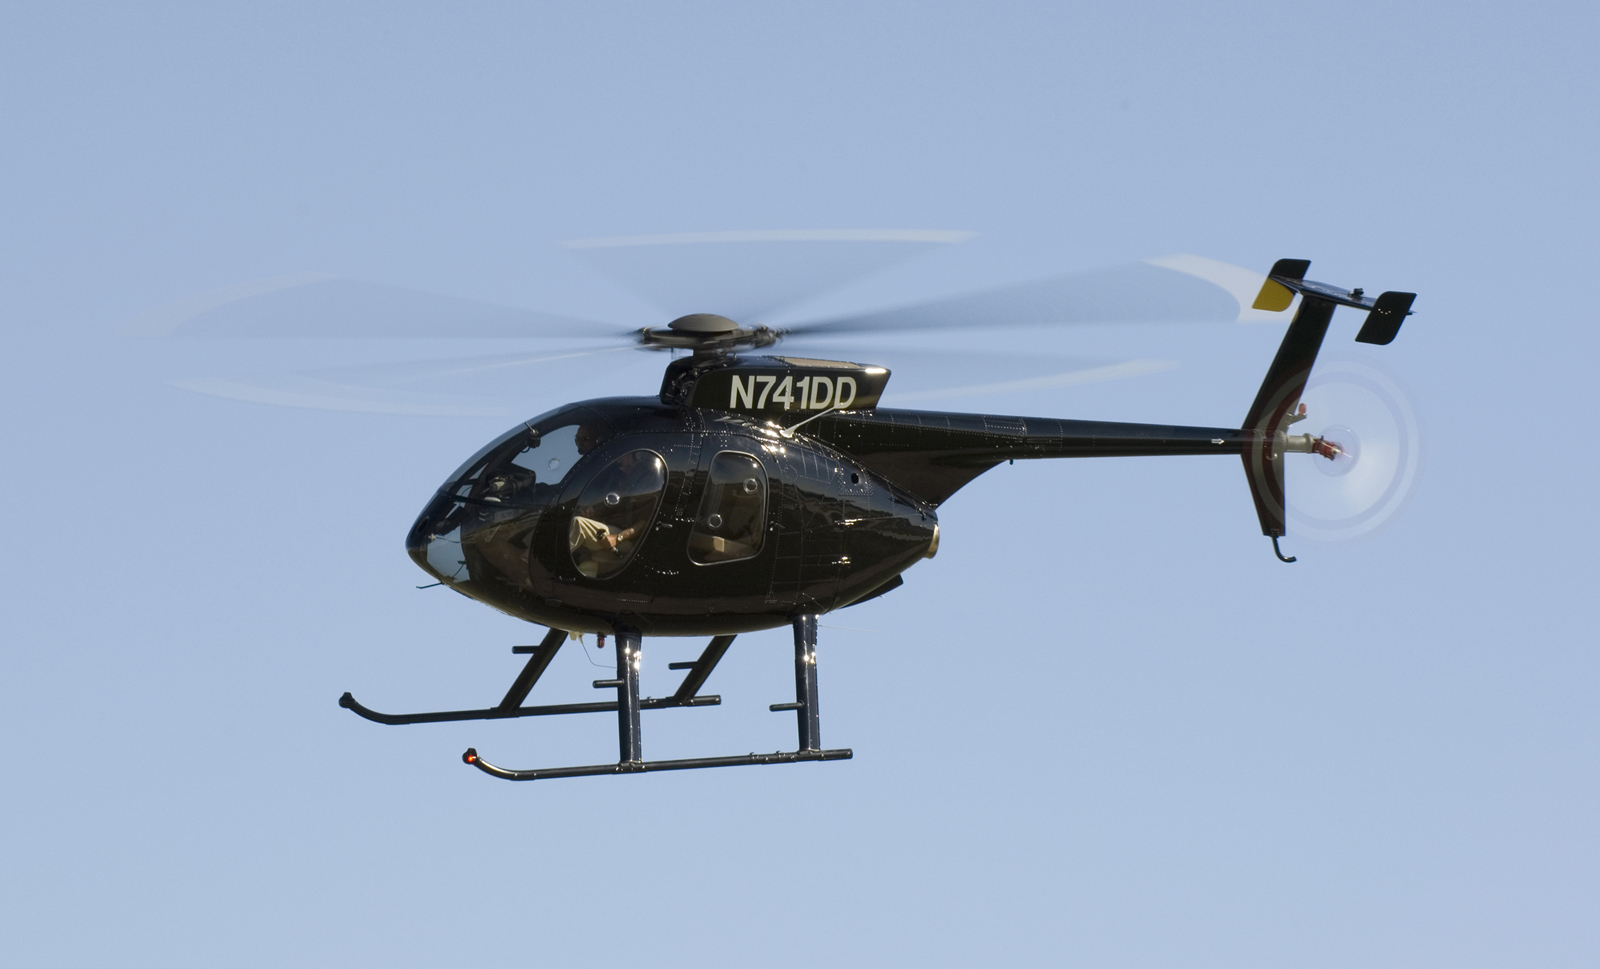 The new MD 530F helicopter will feature the 650shp Rolls-Royce 250-C30 engine, extended tail boom and longer main-rotor blades. MD Helicopters Photo